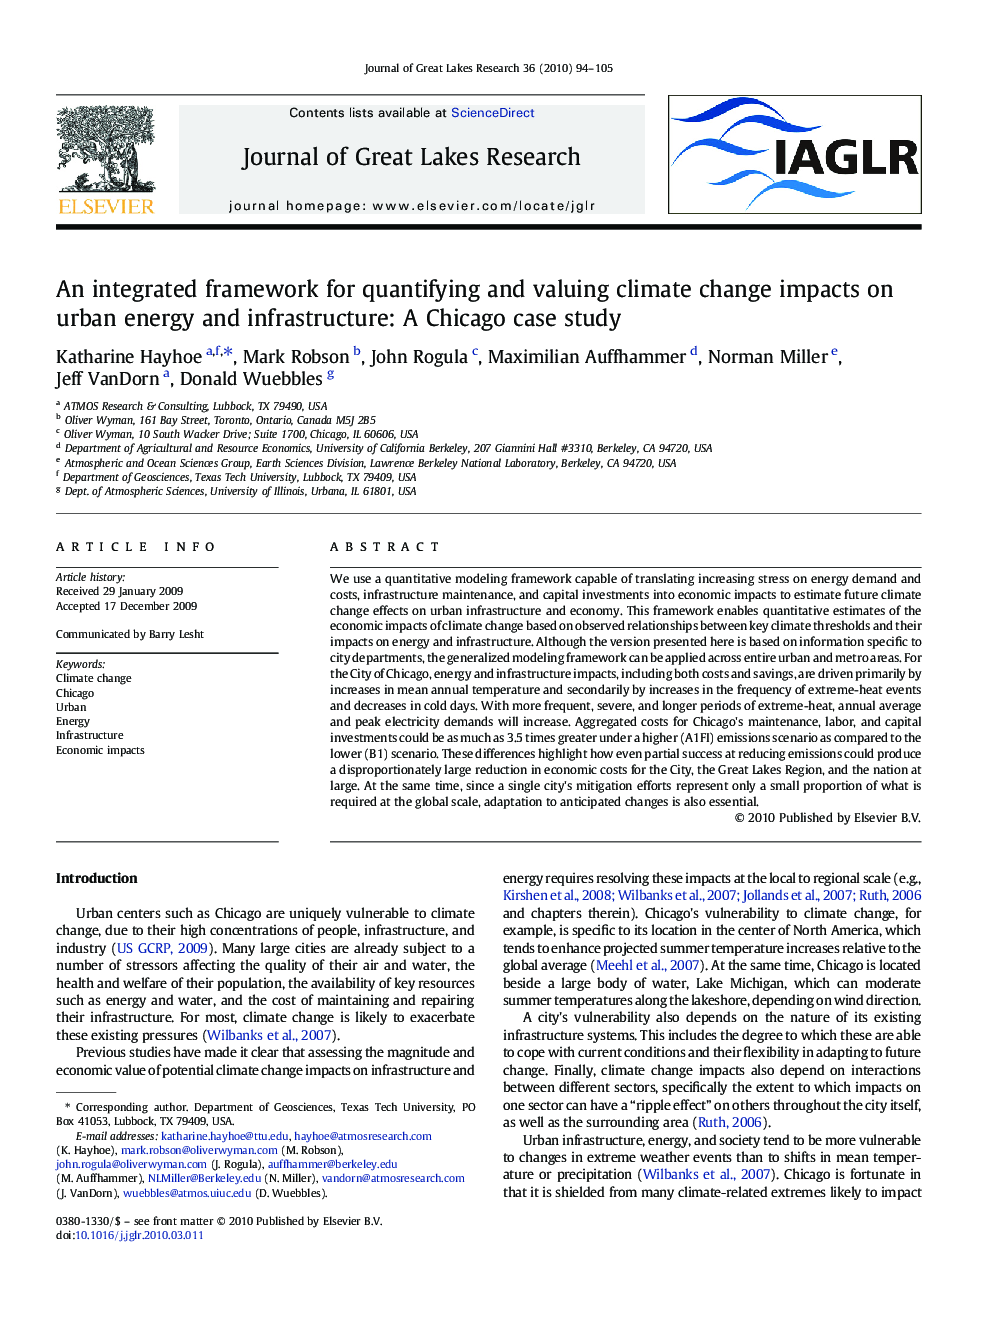 An integrated framework for quantifying and valuing climate change impacts on urban energy and infrastructure: A Chicago case study